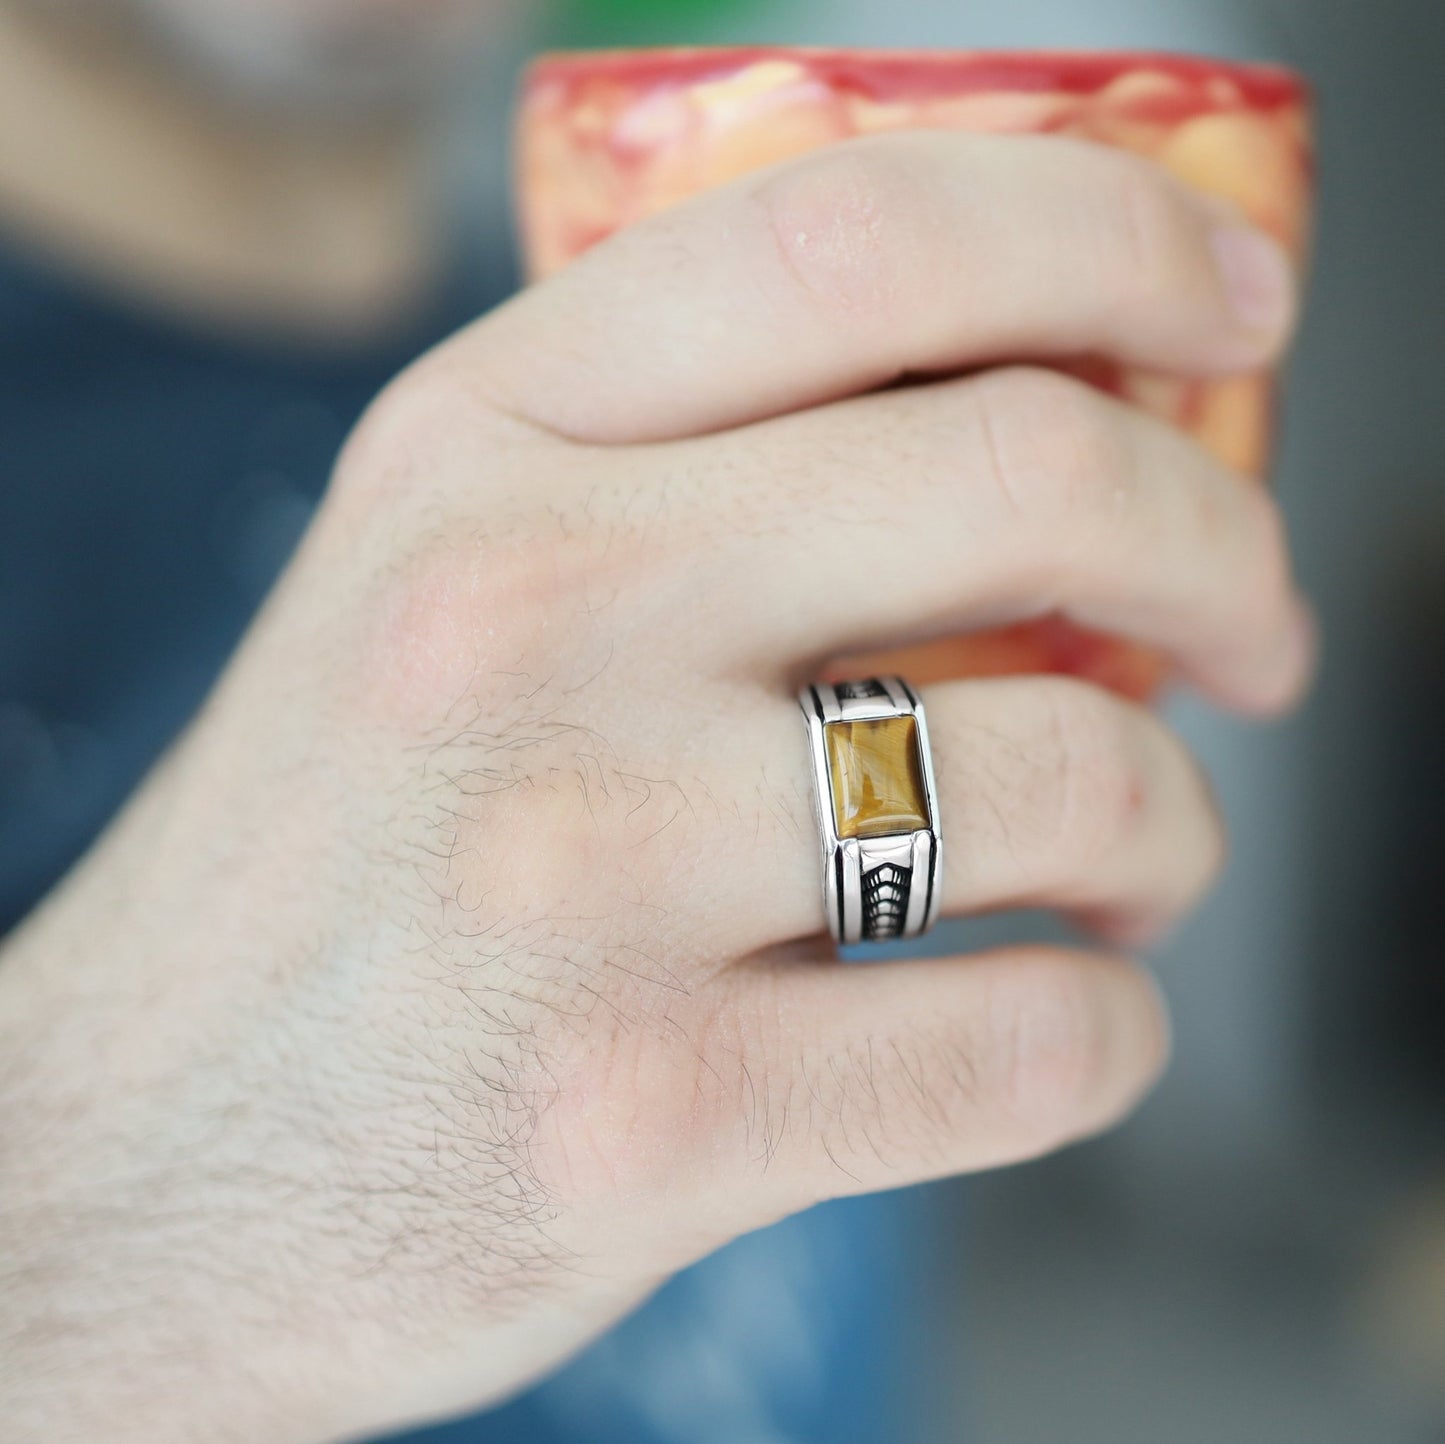 Chimoda Sterling Silver Rings for Men with Arrow Pattern and Tiger Eye Stone - Chimoda